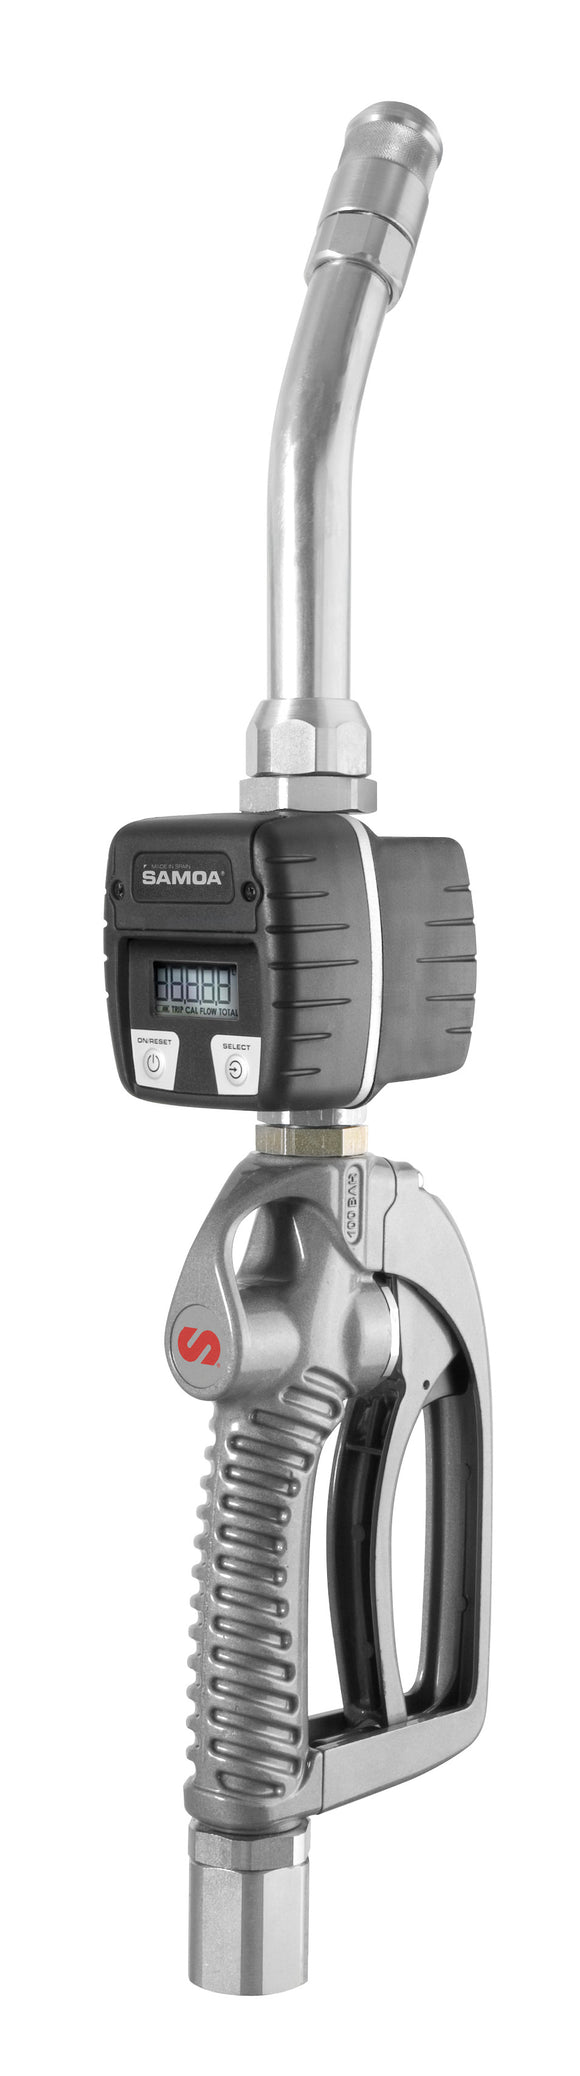 SAMOA Metered High Flow Oil Control Valve with 30° Rigid with Semi-Auto Non-Drip Tip - 1